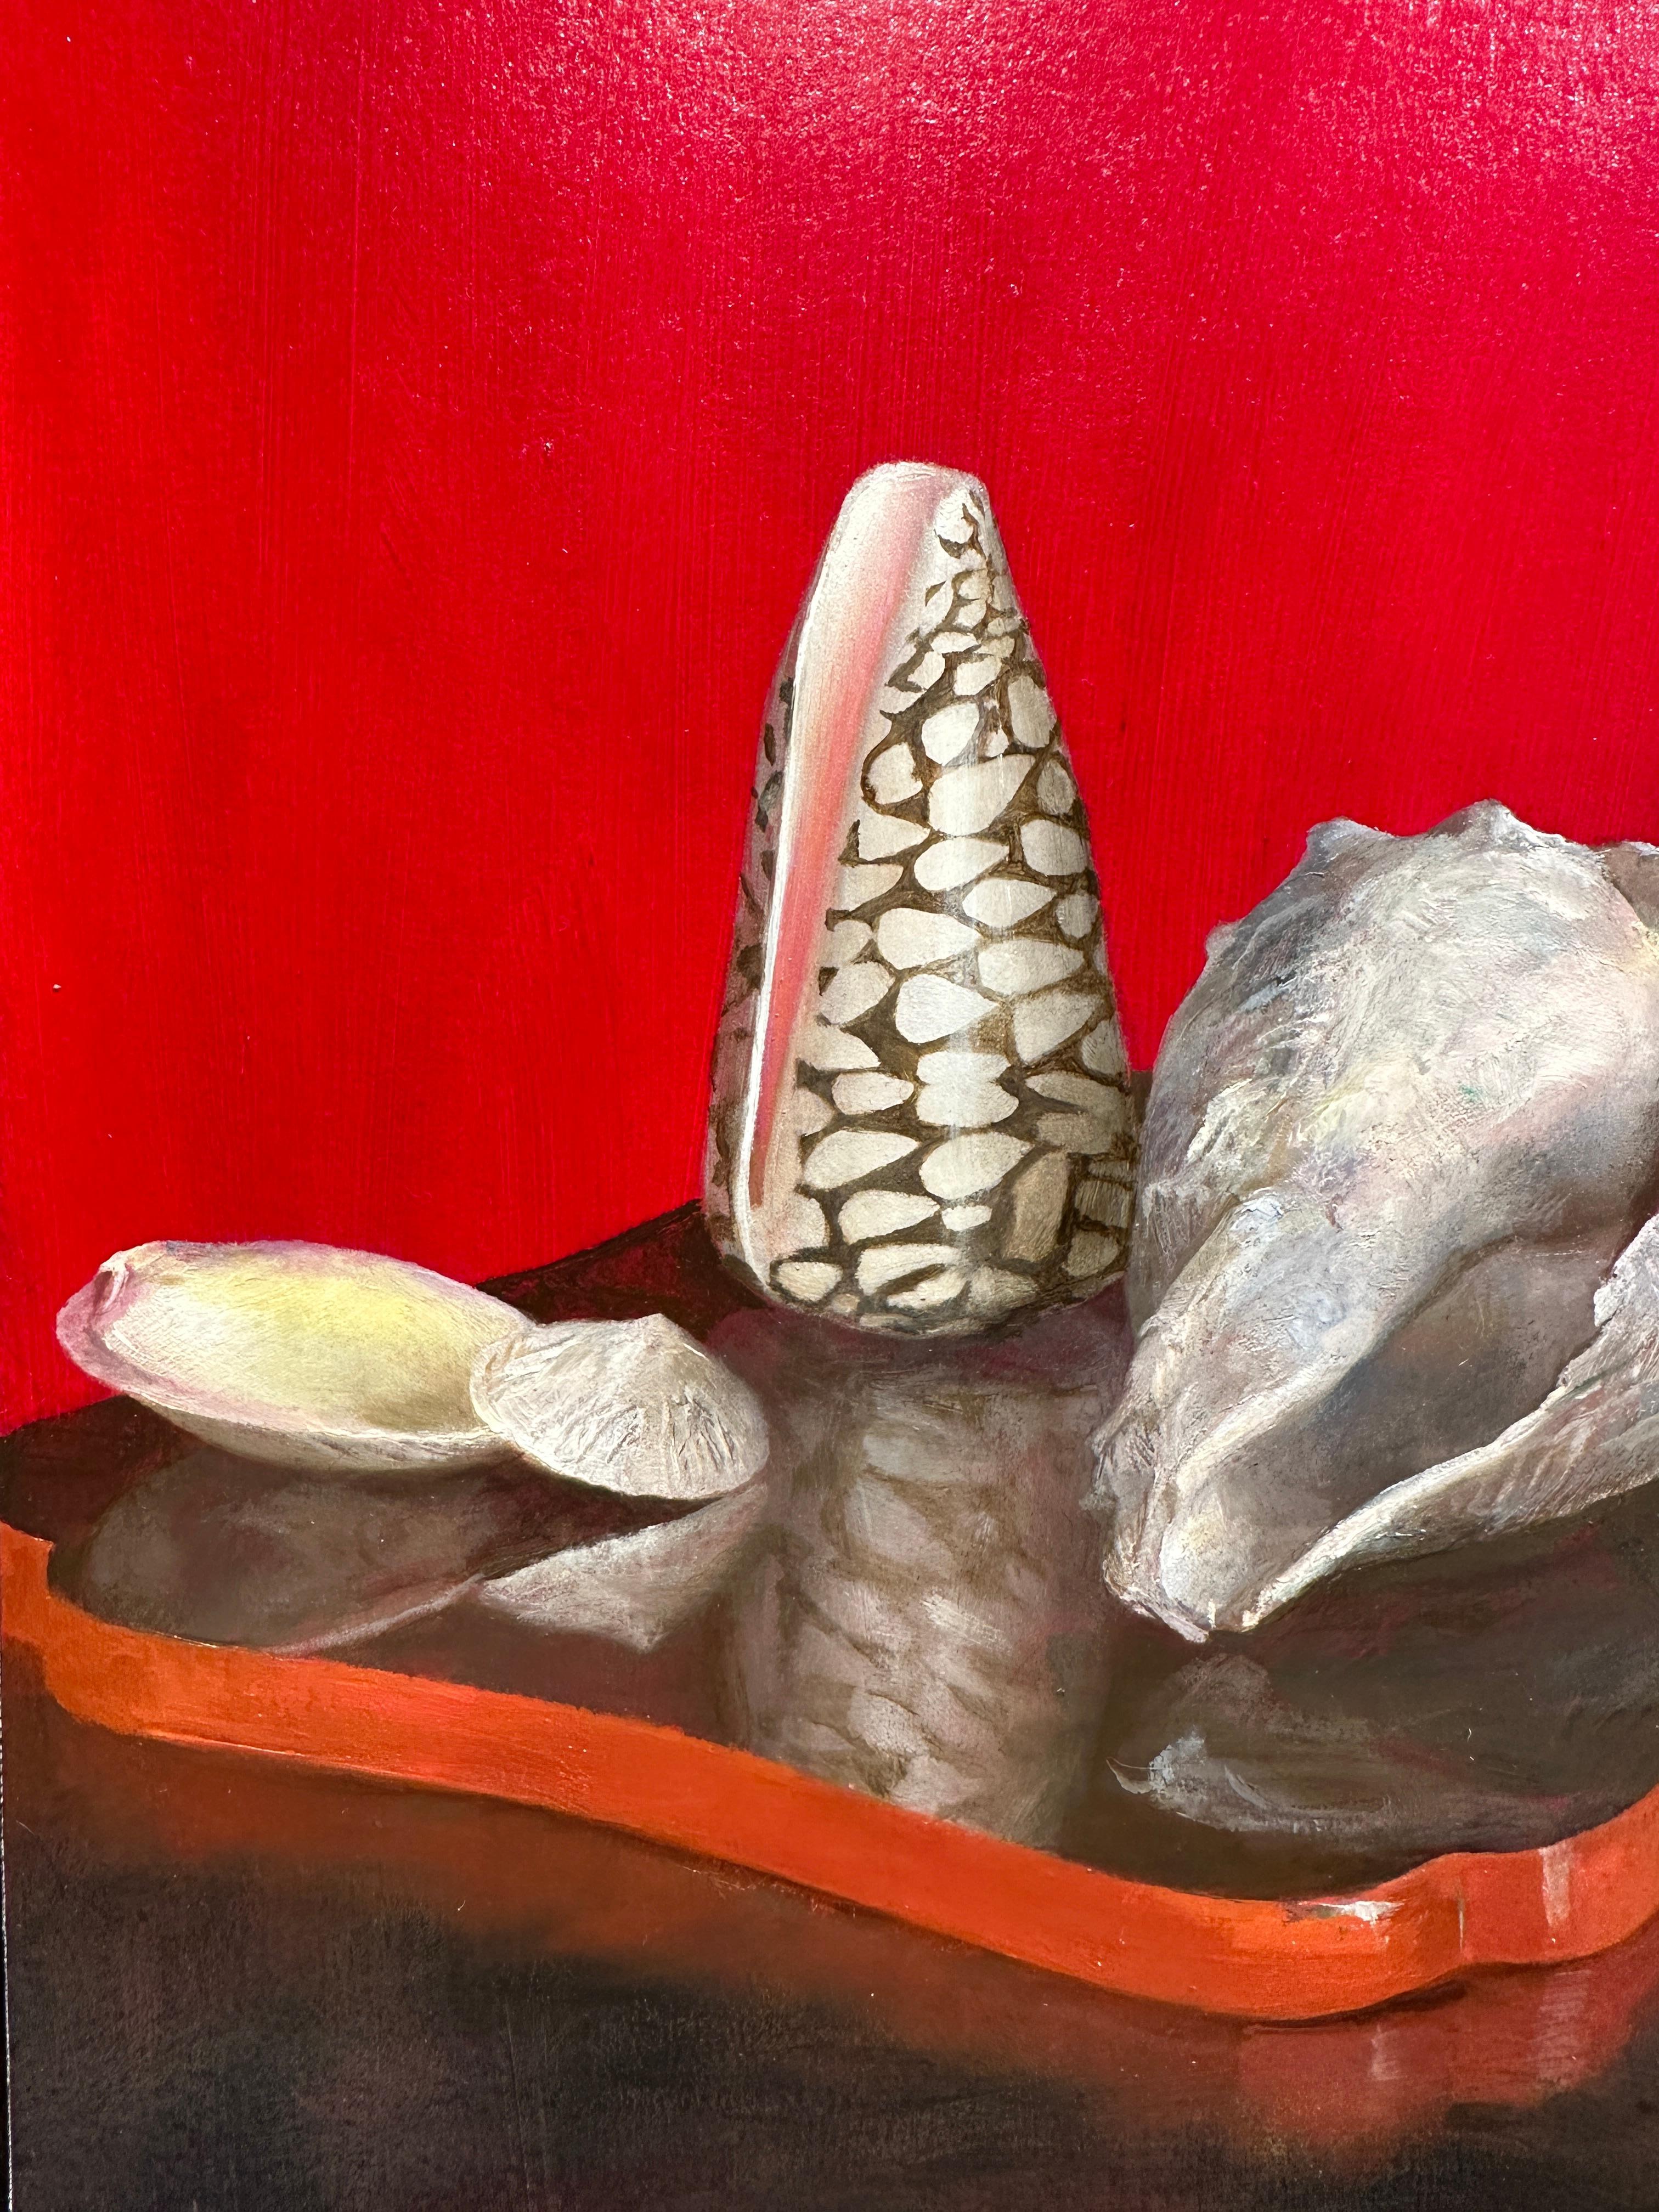 Modern Sea Shells & Water Bottle on Lacquer Tray, Oil on Panel, Still Life Painting For Sale